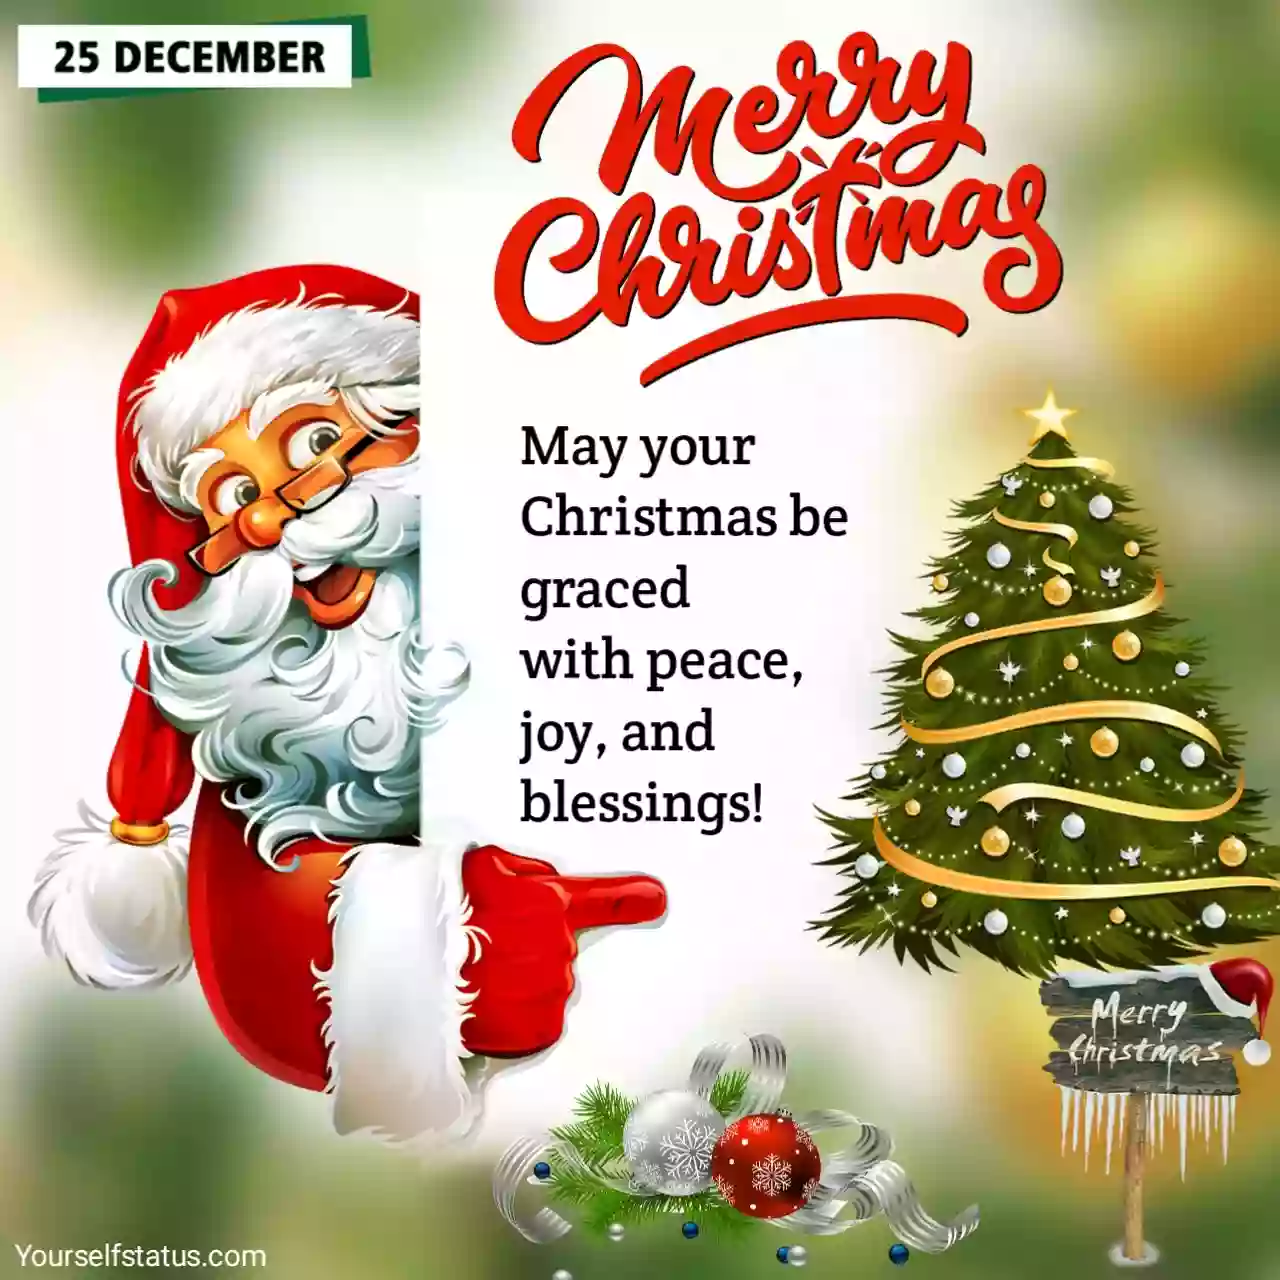 Merry Christmas wishes